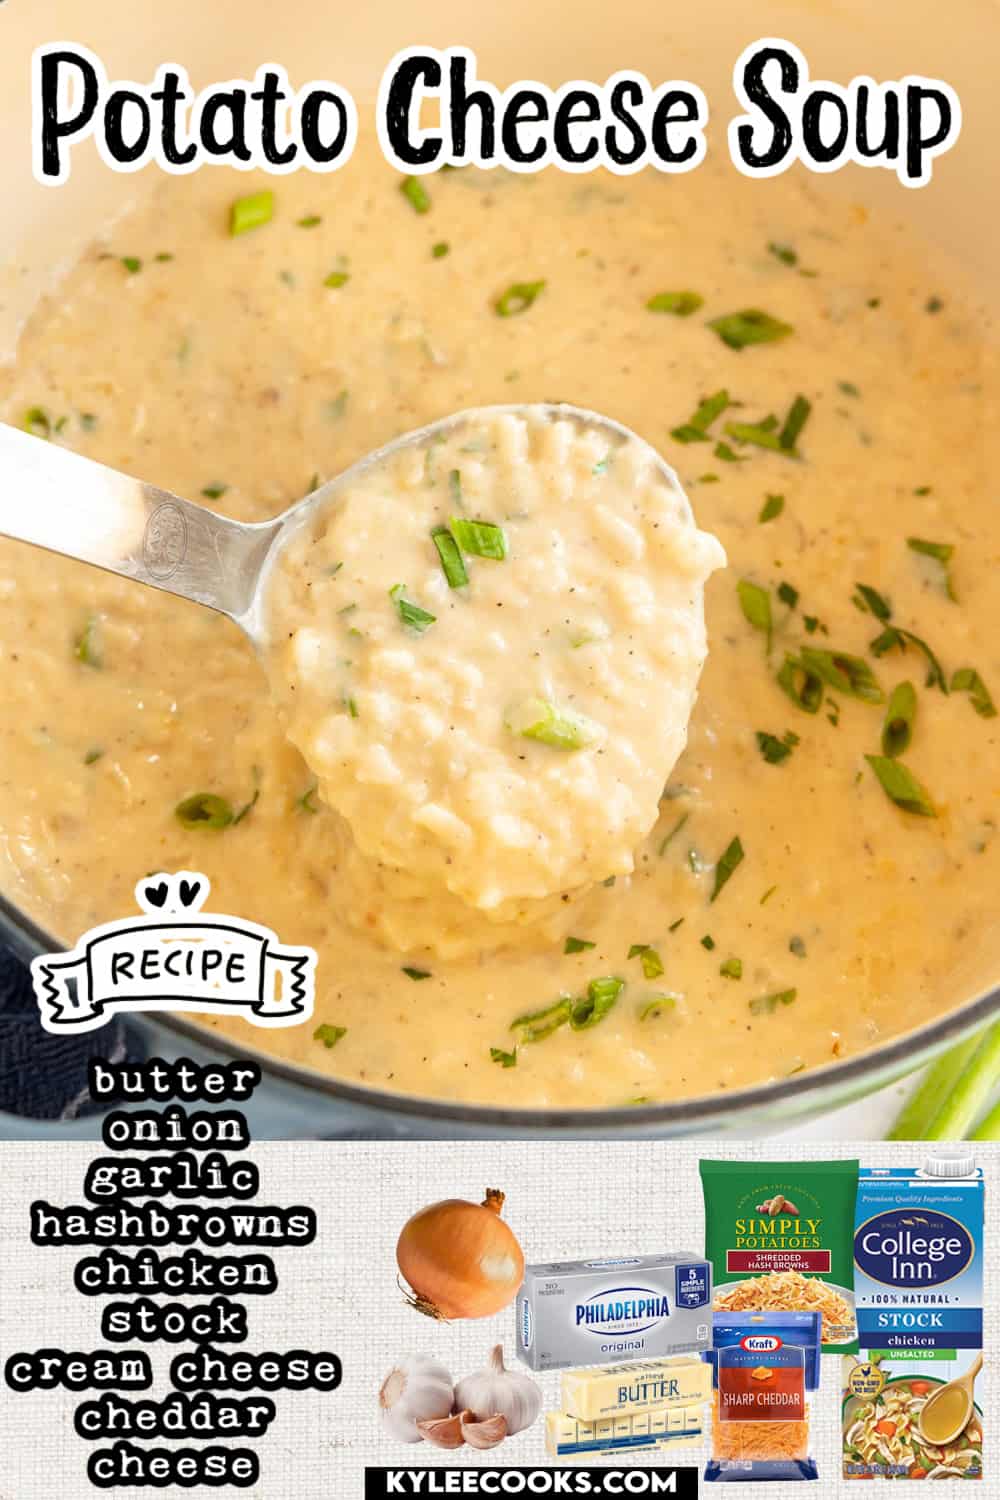 Potato Cheese Soup on a ladle with recipe name and ingredients overlaid in text and images.